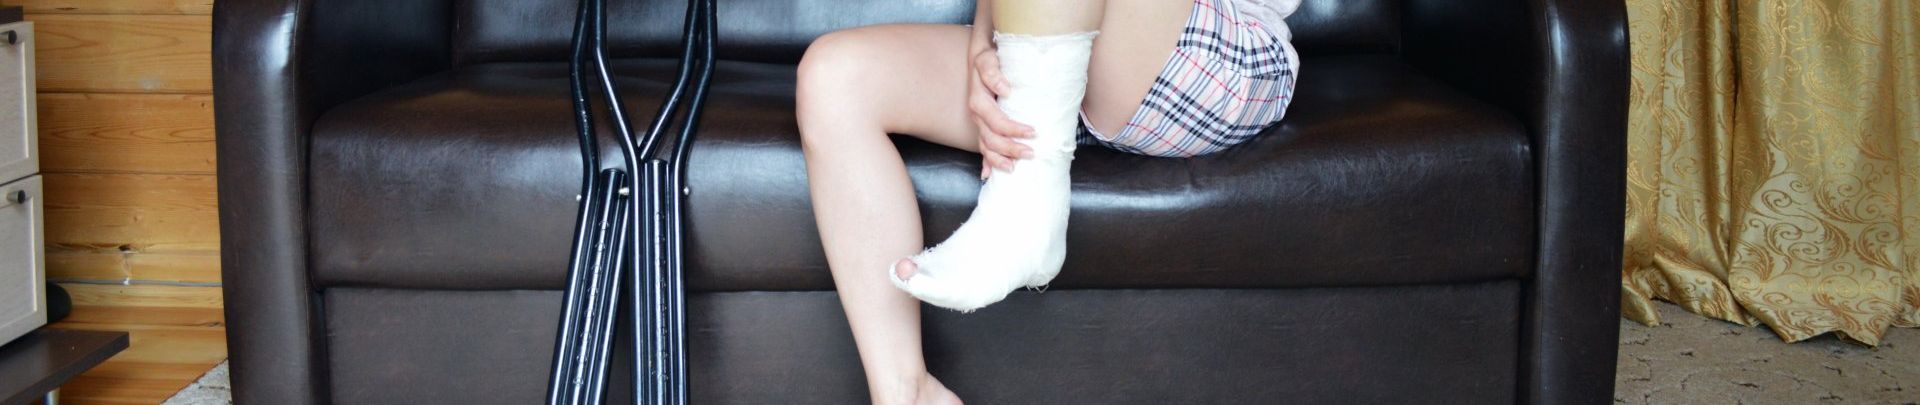 A person suffering from a broken bone after a slip and fall accident